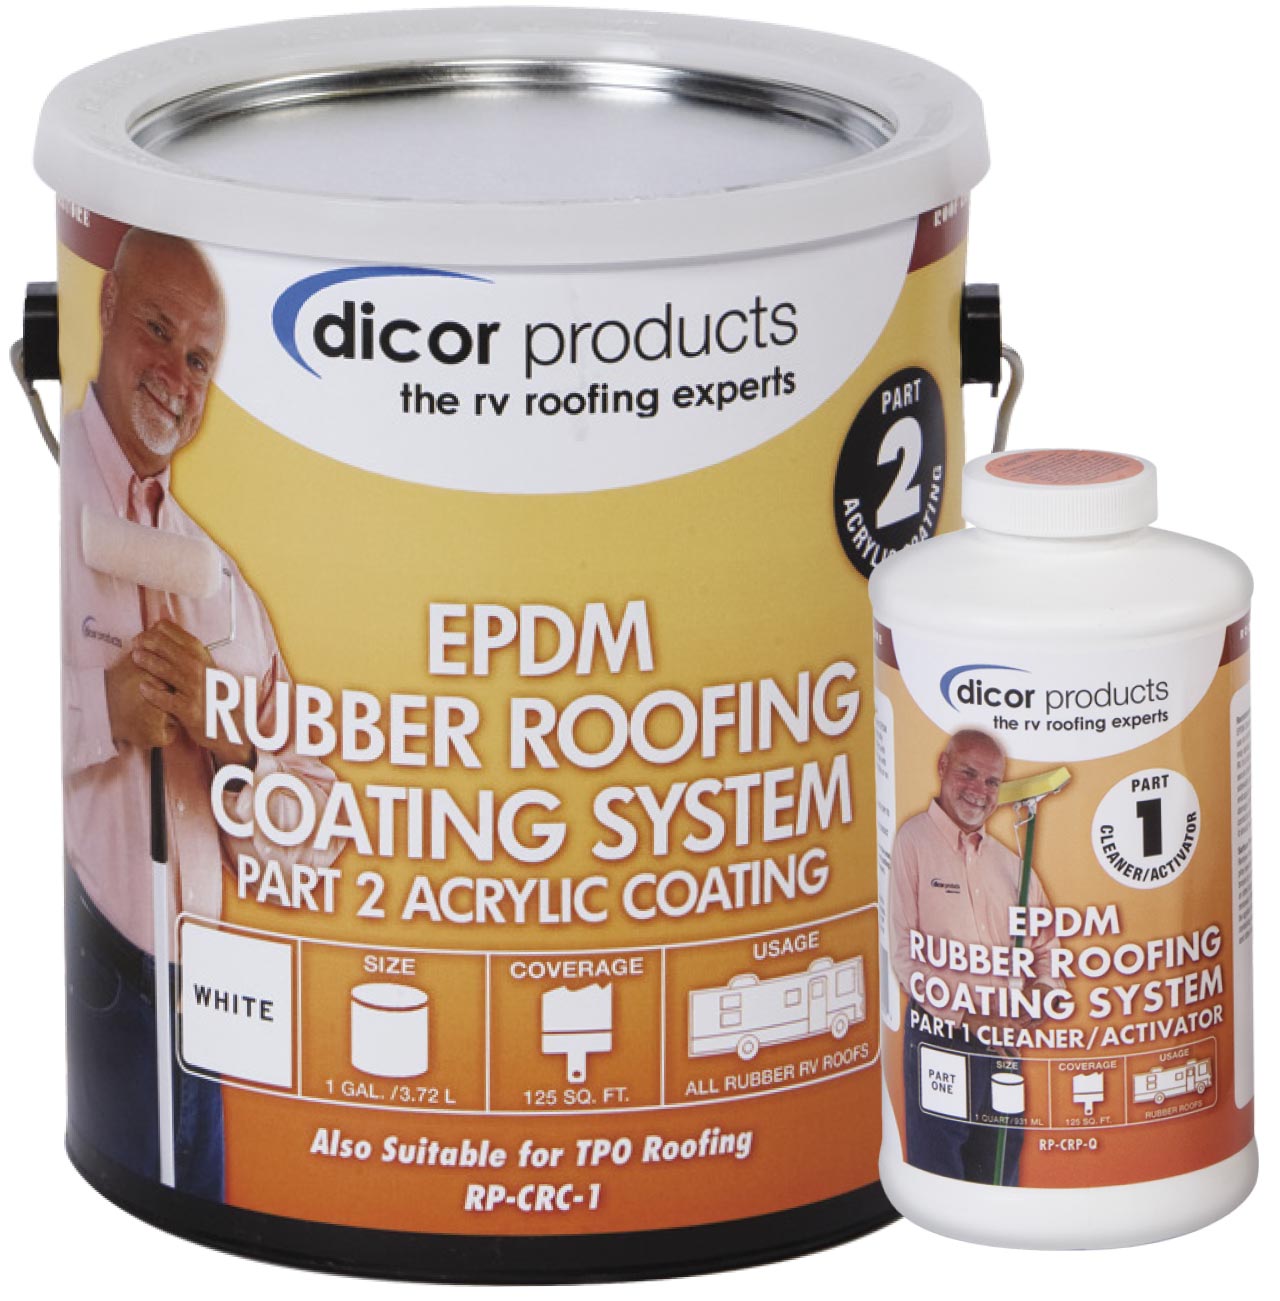 EPDM Rubber Roofing Coating System product